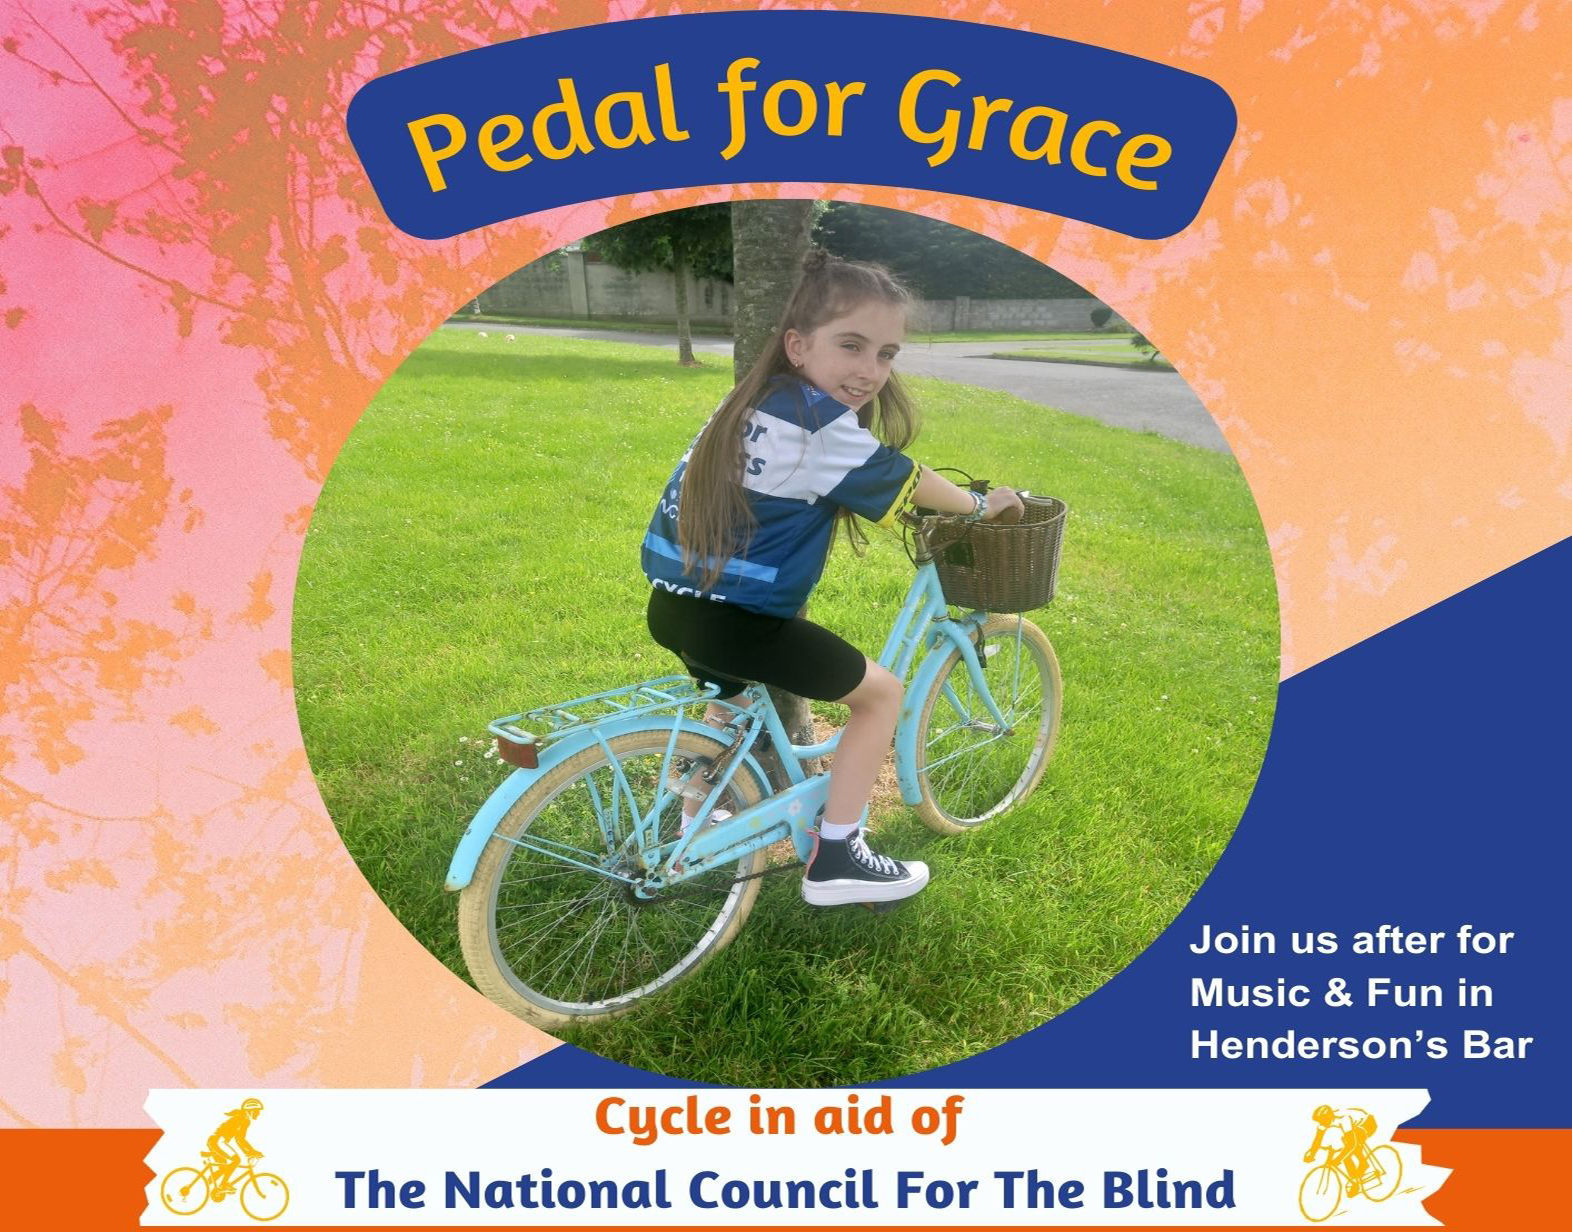 The poster for Pedal for Grace had a colourful background with a picture of Grace on her bicycle in the middle of the image.